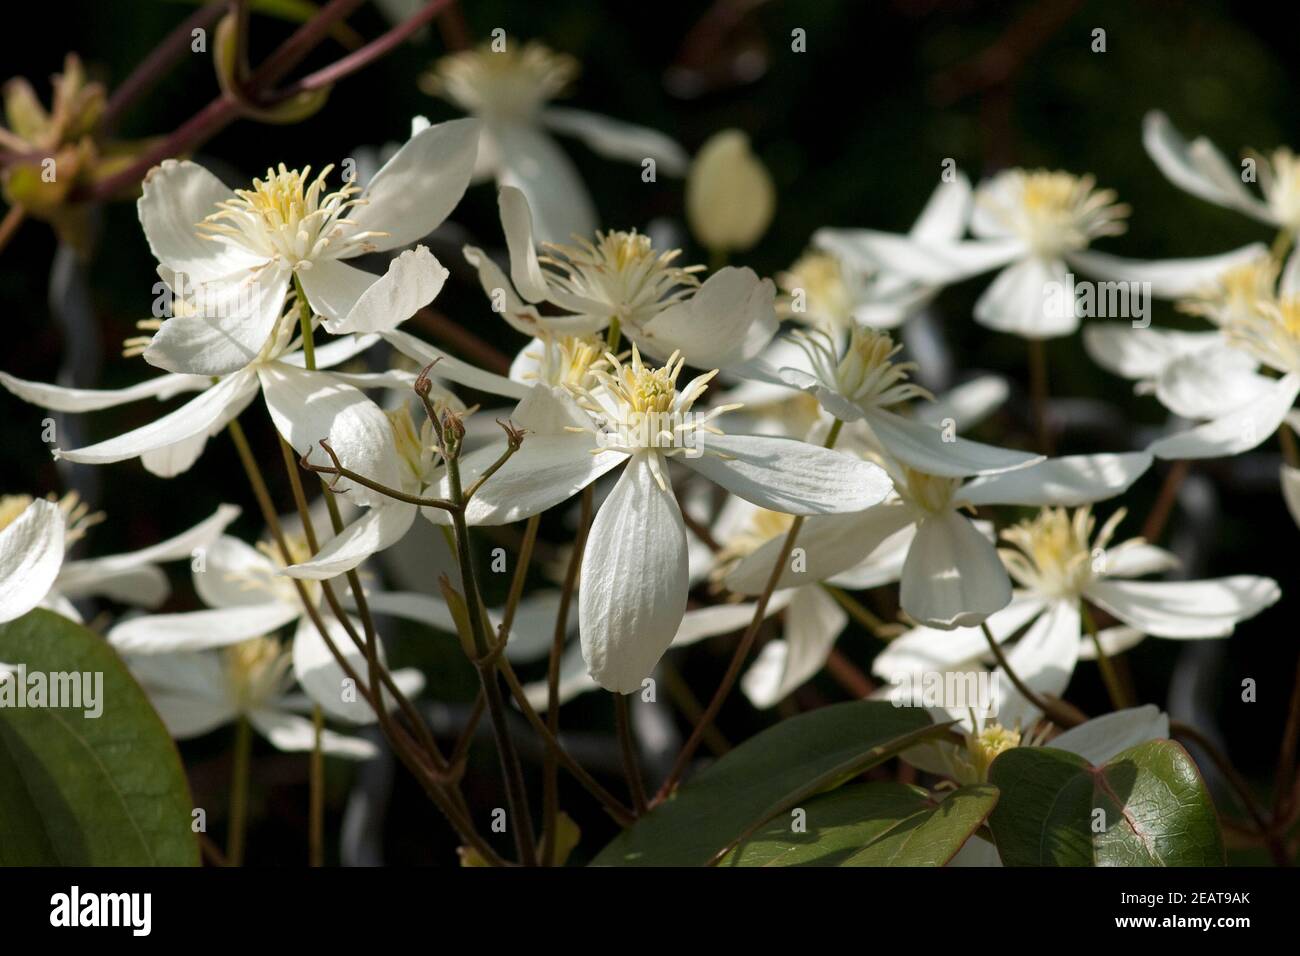 Armands, waldrebe, Clematis Foto Stock